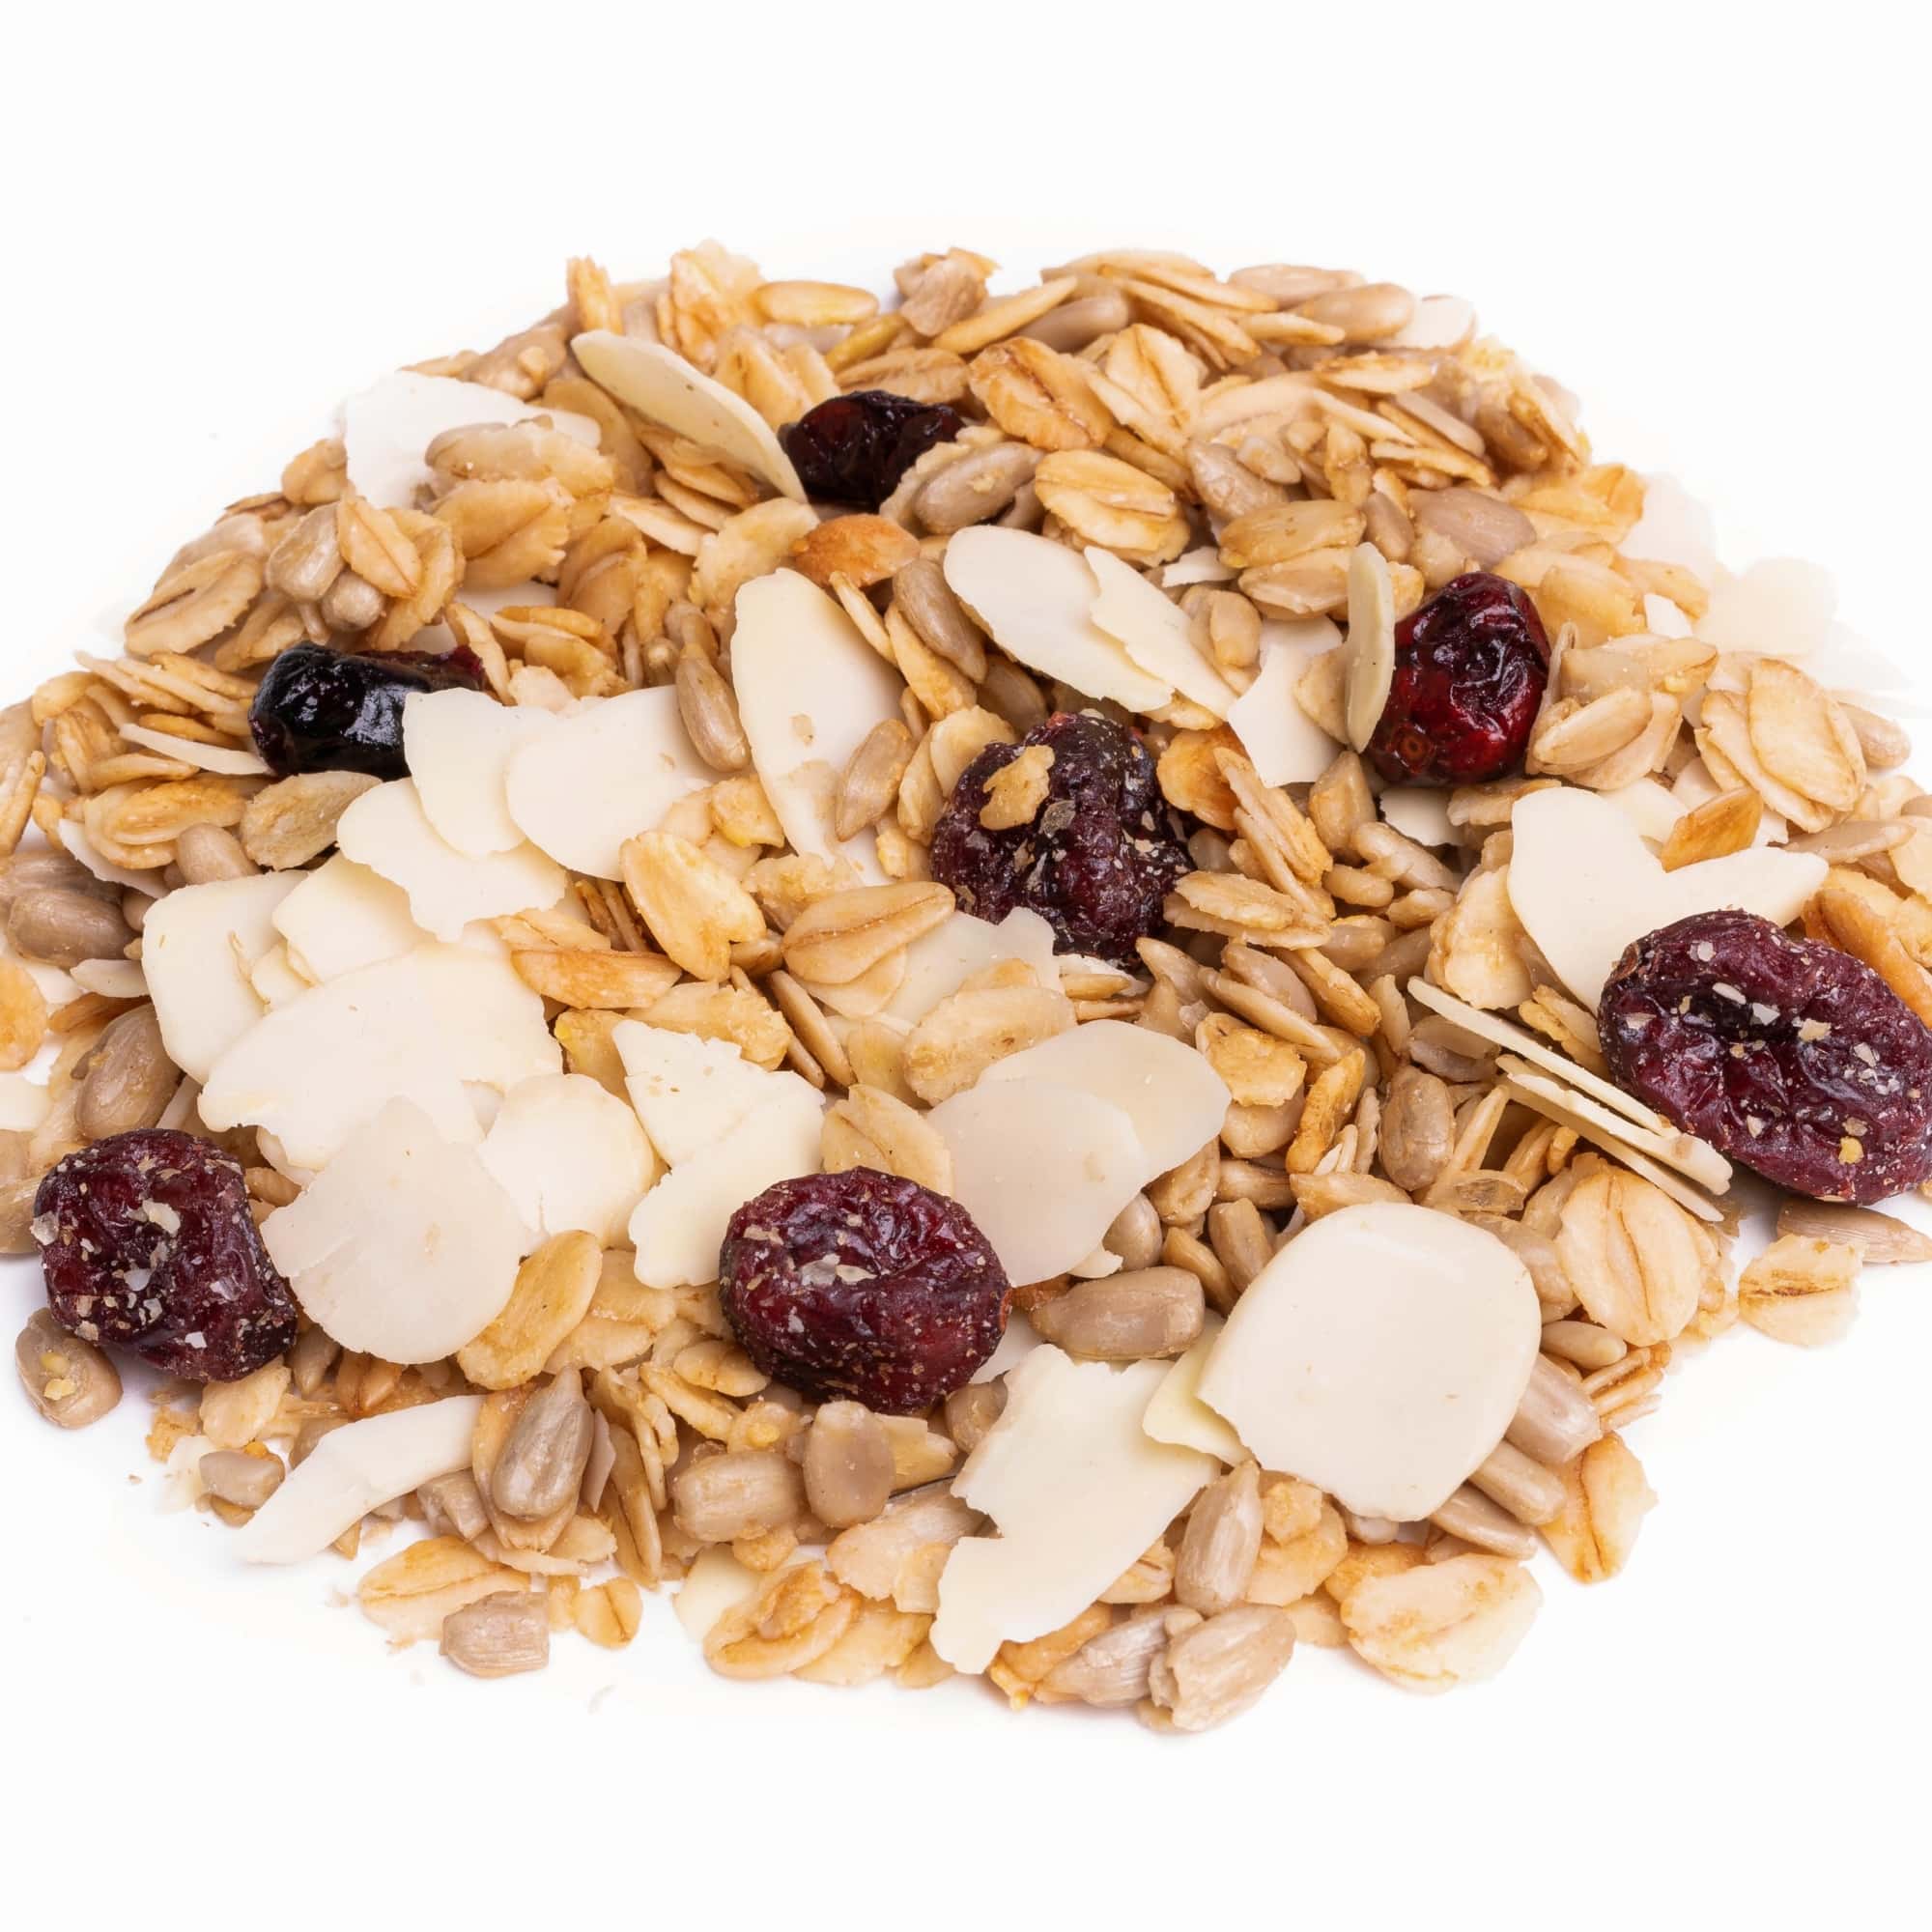 Organic Granola with Almond flakes and Cranberries - The Bio Foods